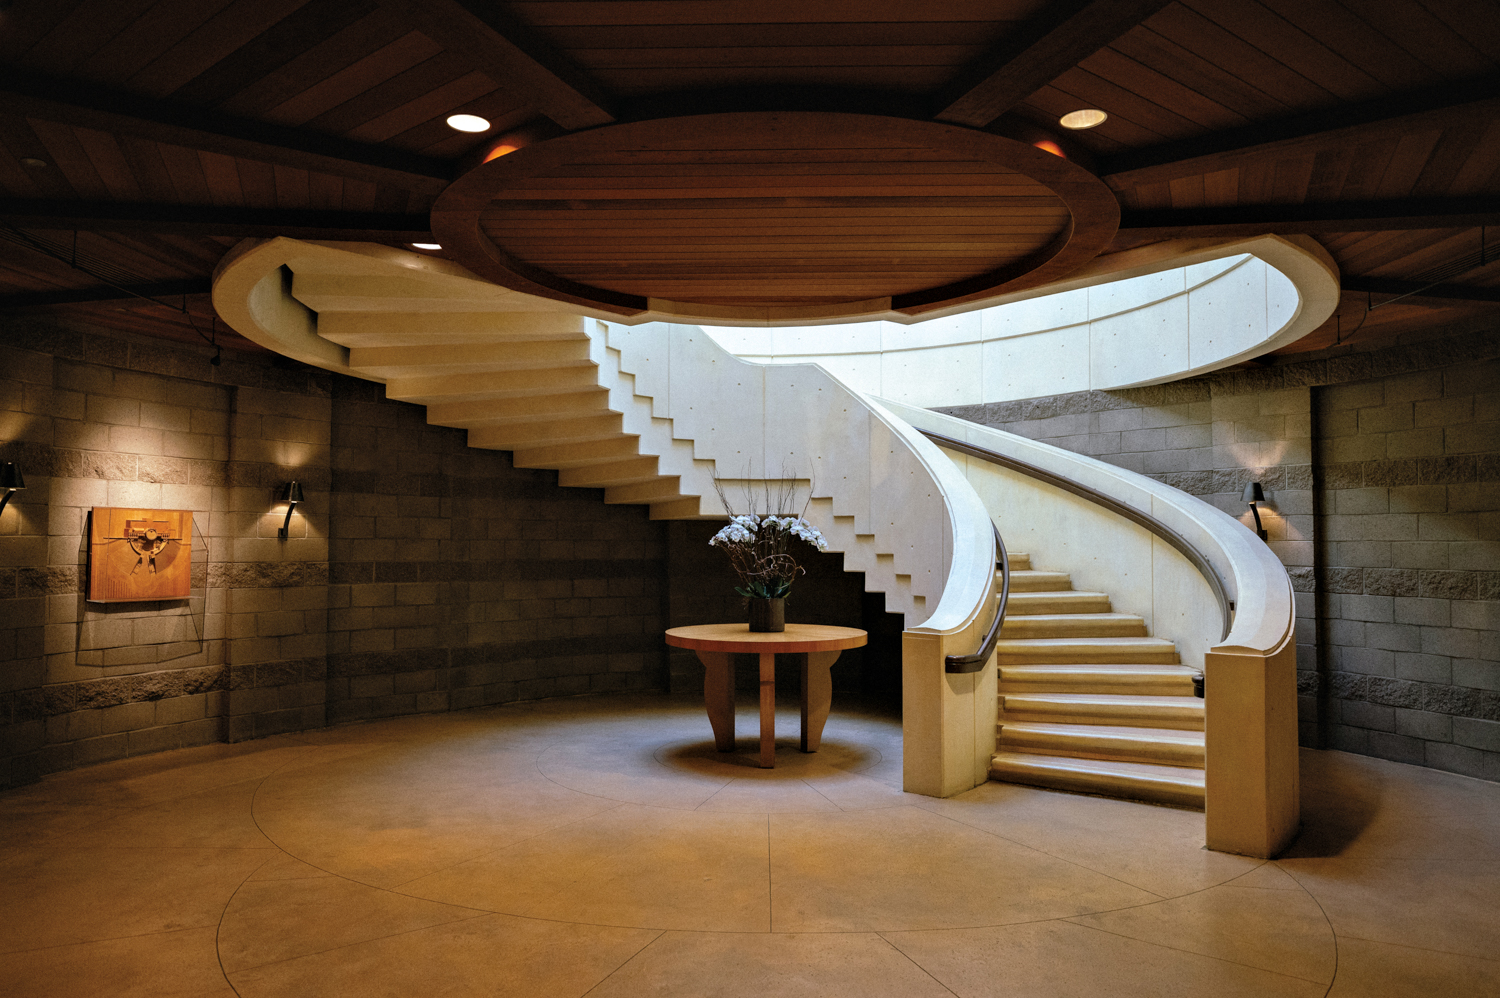 Opus One with stone walls, a round wood coffee table, artwork, moody lighting and a curved staircase